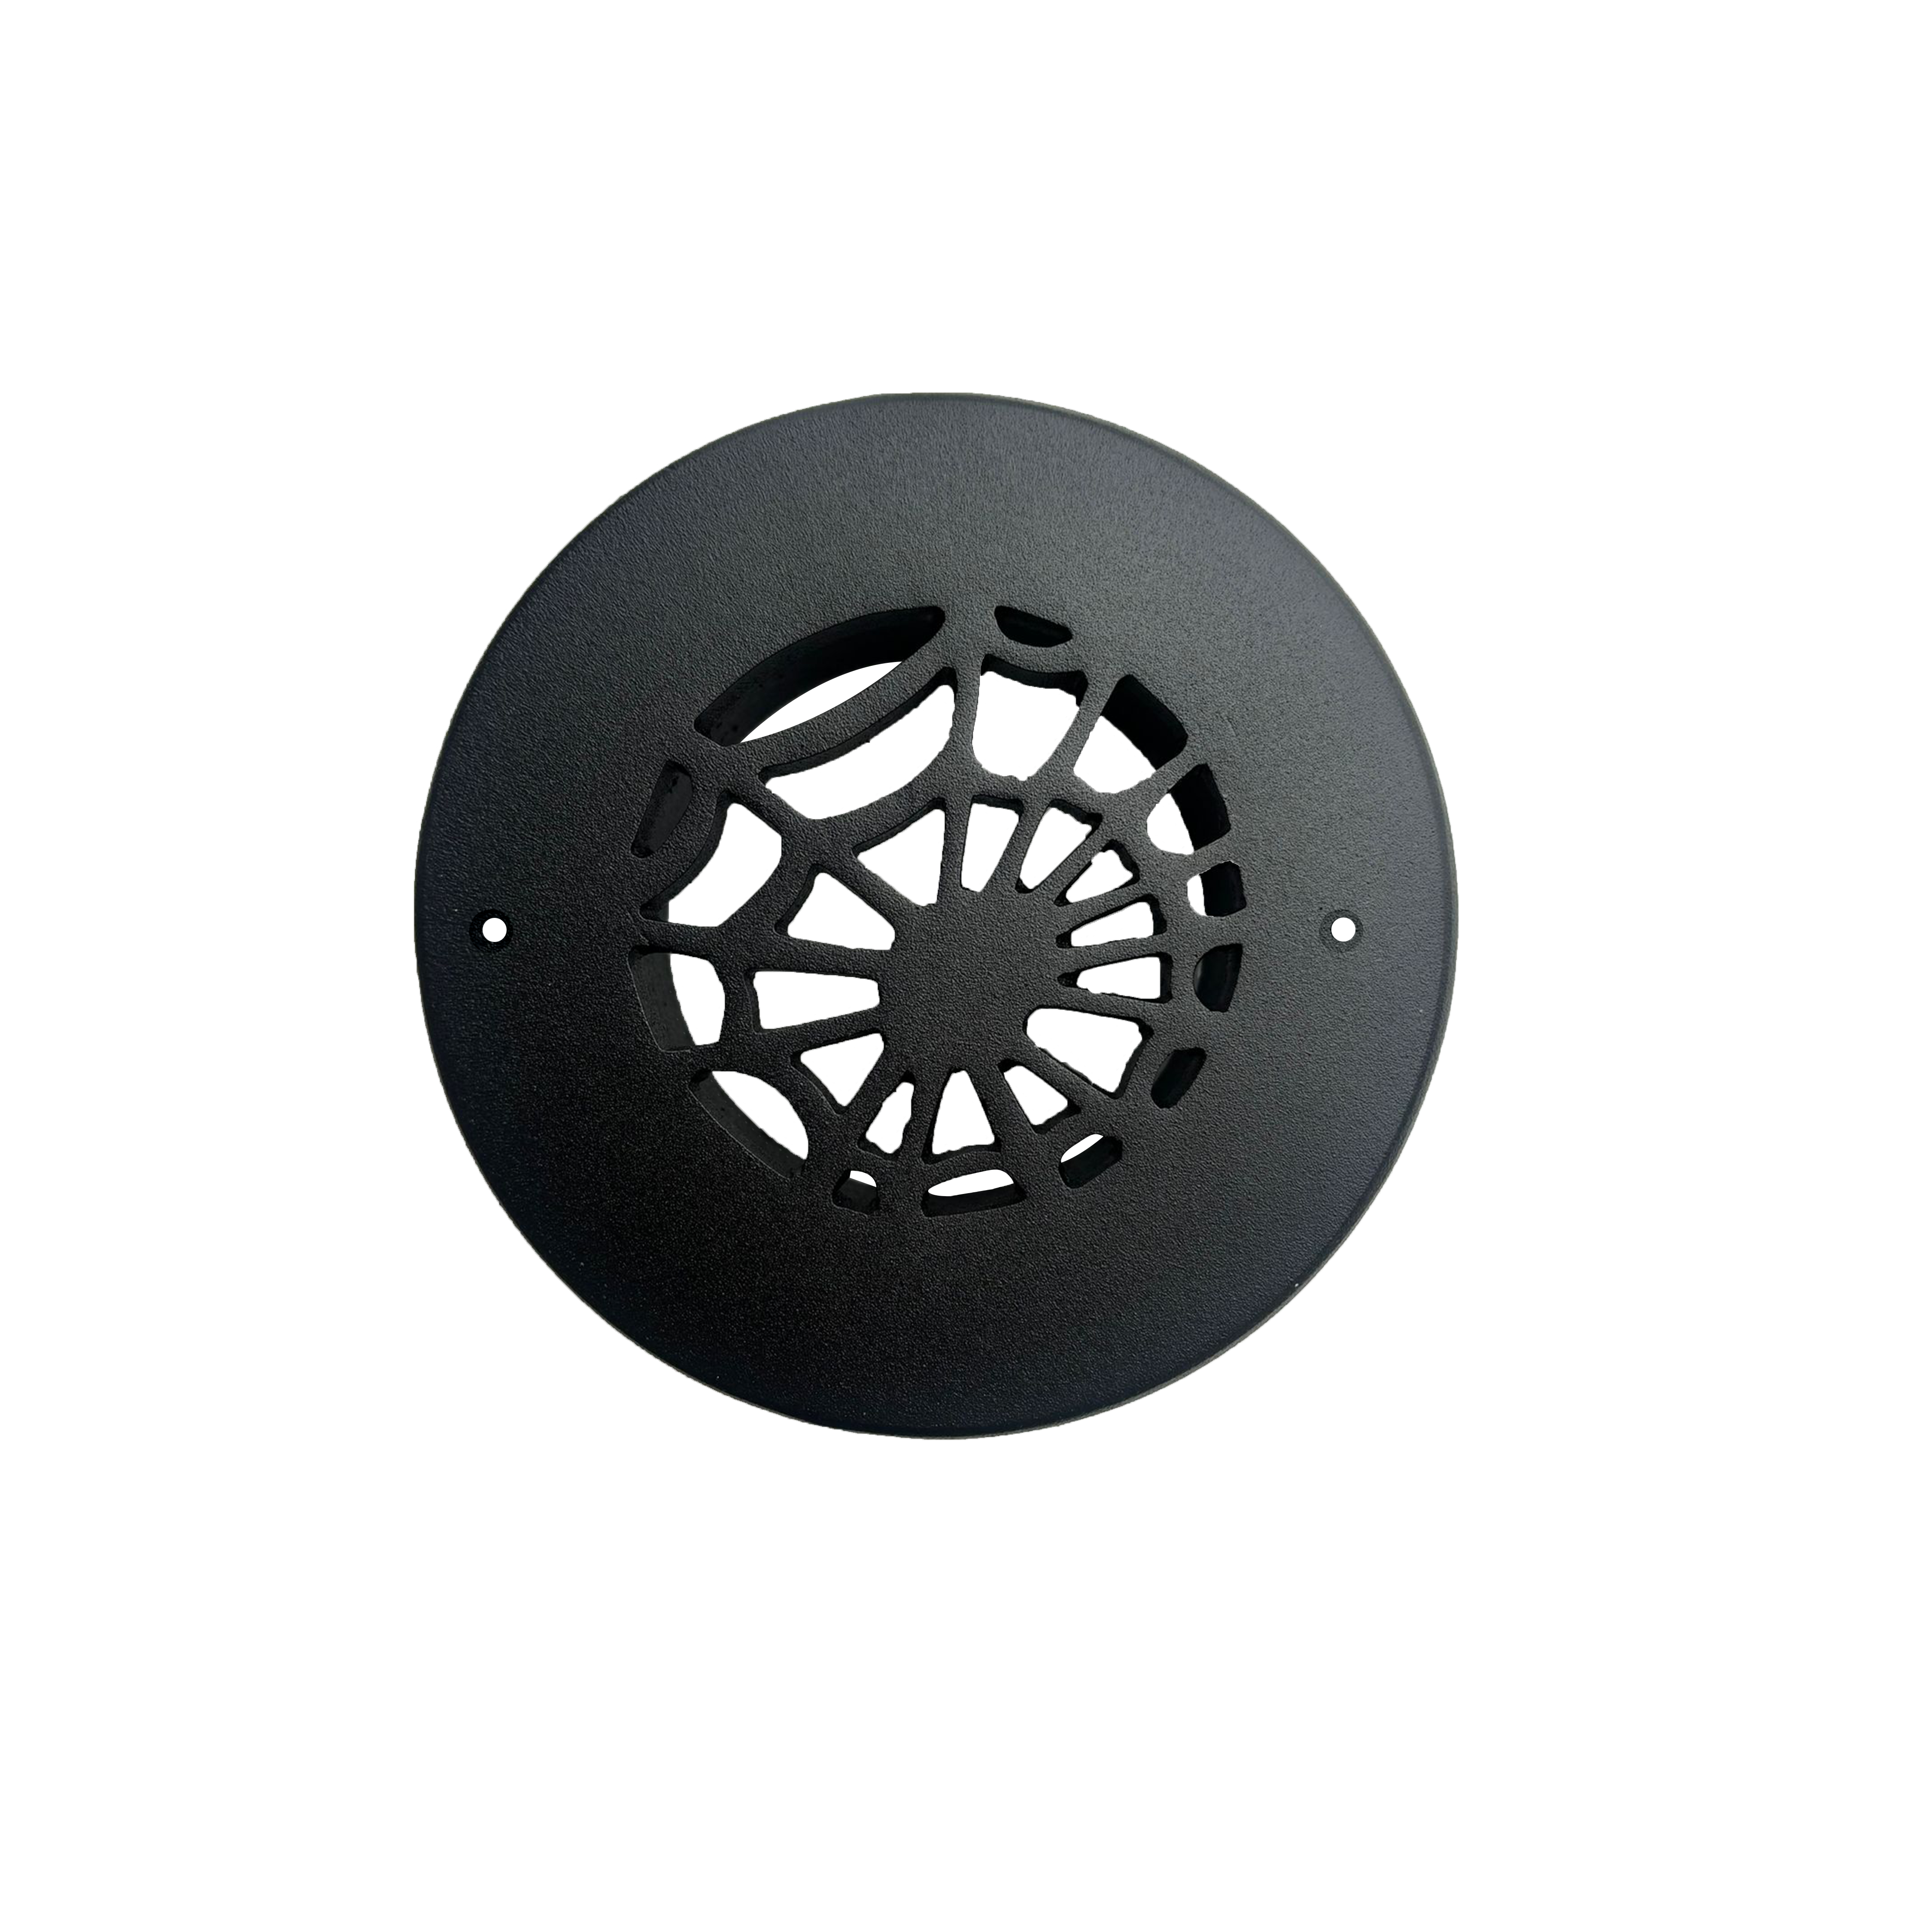 Spooky Gothic Round Vent cover 4" Duct Opening (Overall 5-1/2") in Spider Web Design | Solid Cast Aluminium Register Cover | Powder Coated